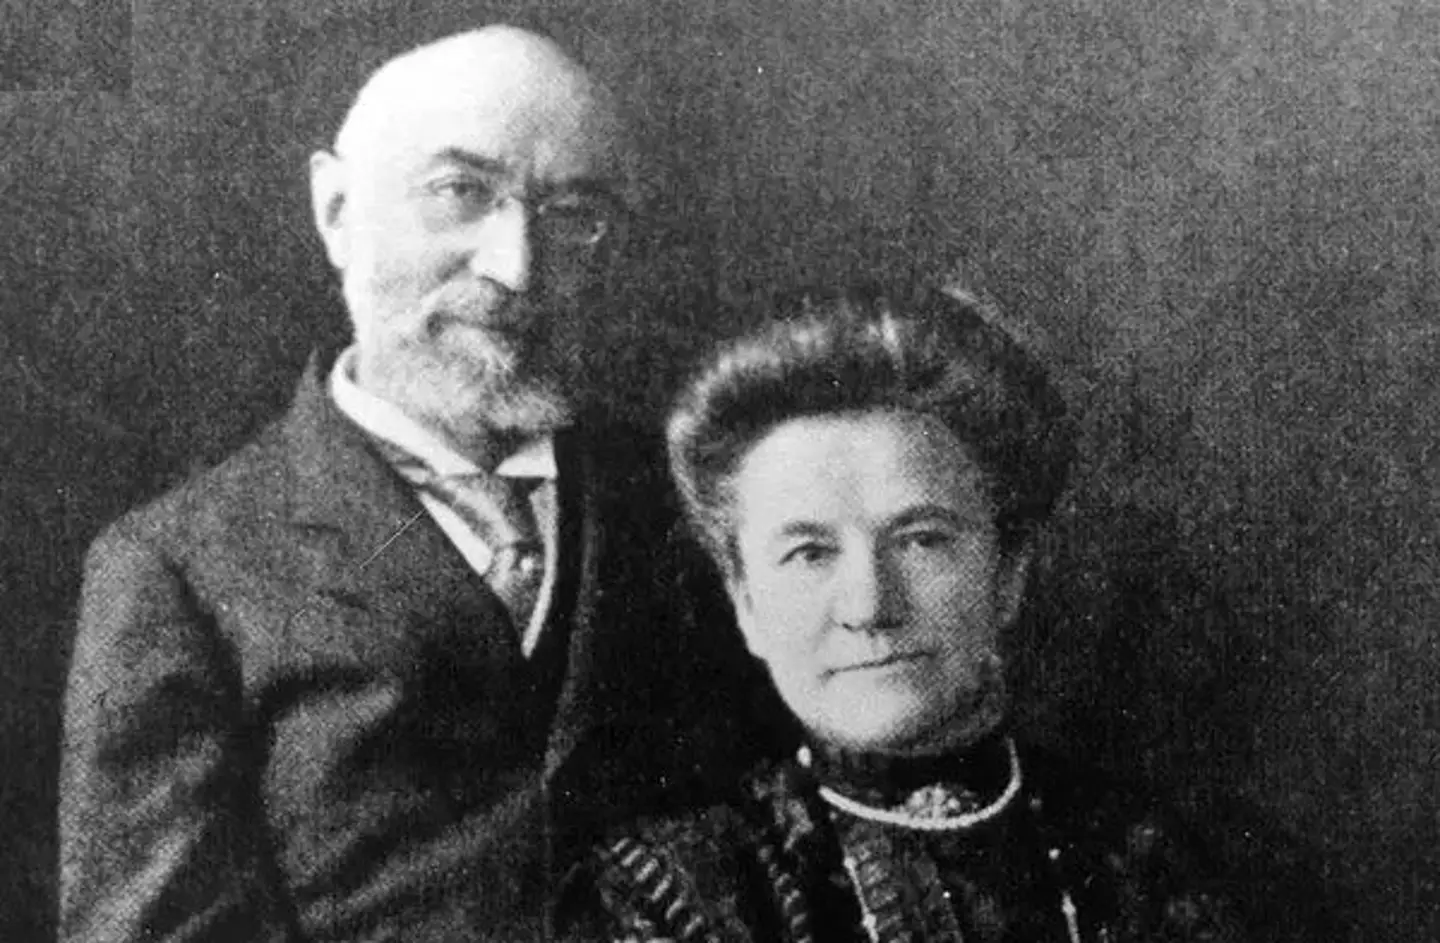 Isidor and Ida Straus were tragically lost during disaster.